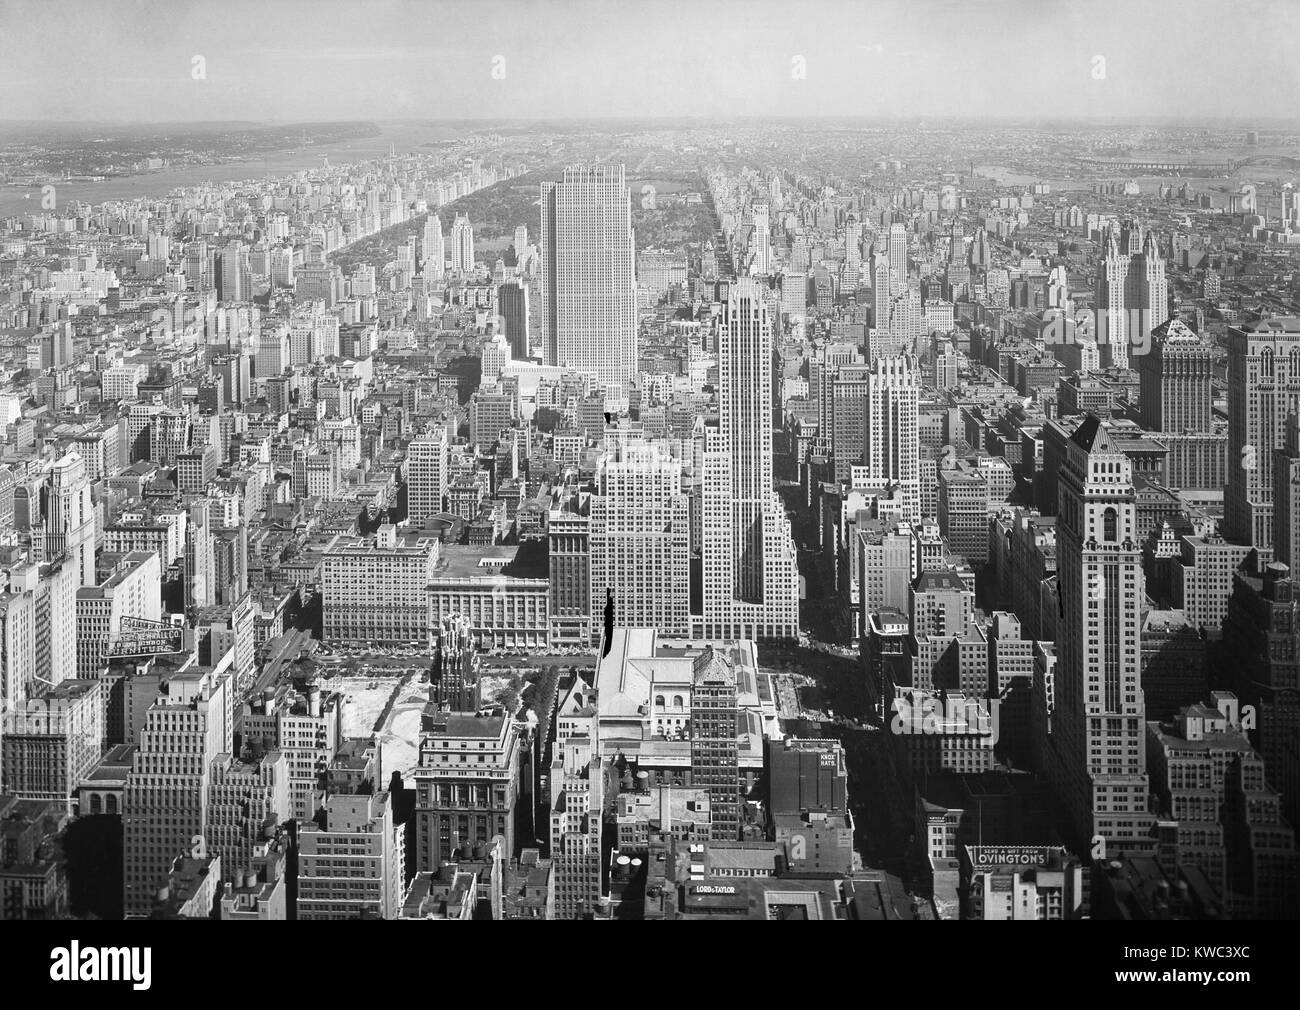 View North from NYC's Empire State Building includes the new RCA Building. Sept 11, 1933. Beyond are the Upper West and East Sides, bordering Central Park. Photo by Samuel H. Gottscho. (BSLOC_2015_14_204) Stock Photo